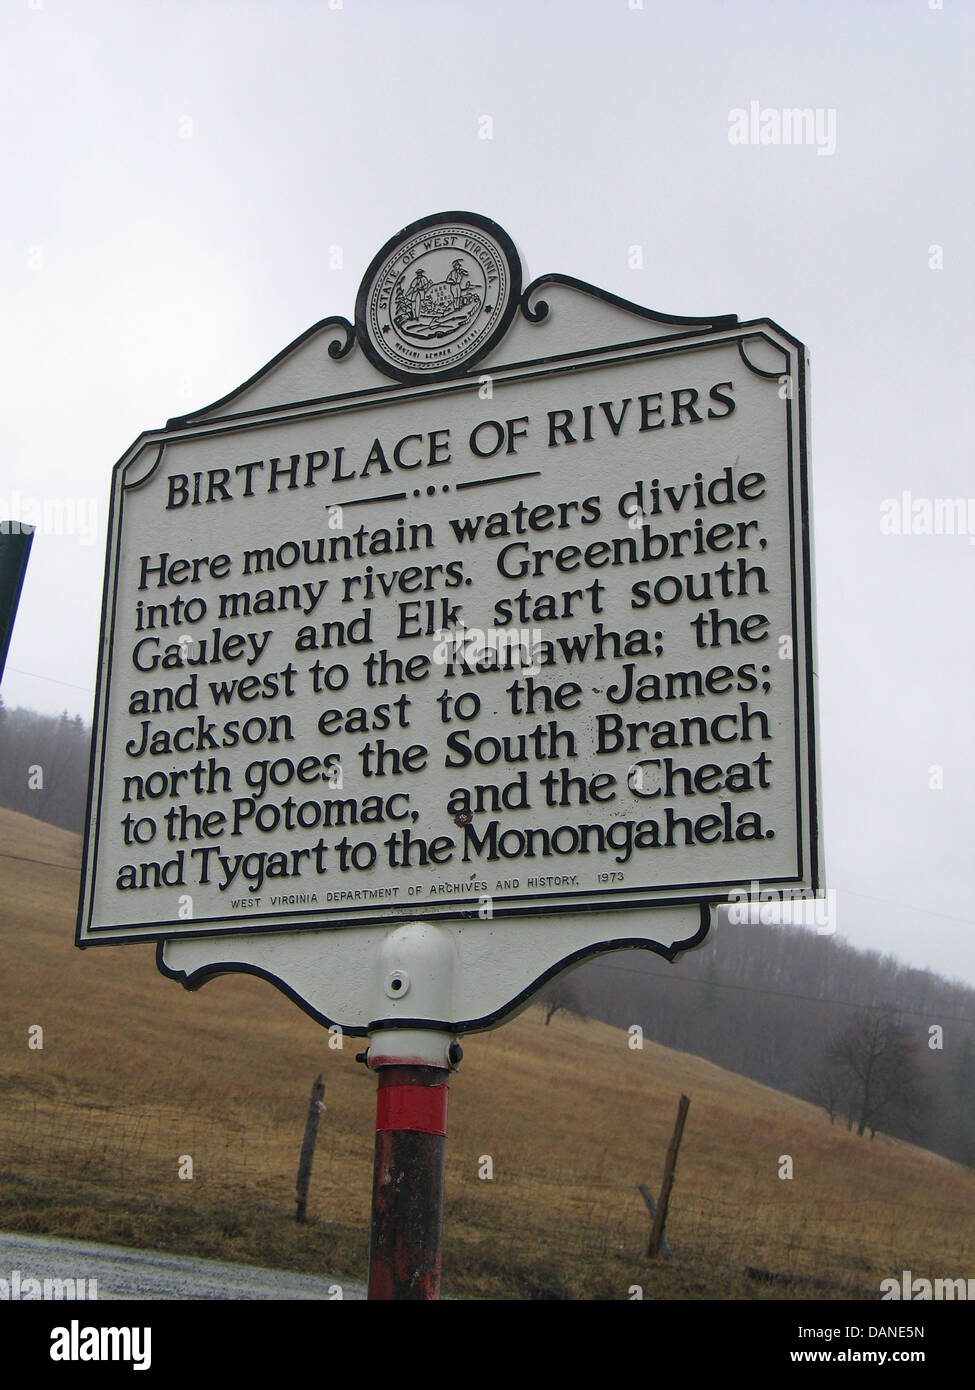 BIRTHPLACE OF RIVERS Here mountain waters divide into many rivers. Greenbrier, Gauley and Elk start south and west to the Kanawha; the Jackson east to the James; north goes the South Branch to the Potomac, and the Cheat and Tygart to the Monongahela. West Virginia Department of Archives and History, 1973. Stock Photo